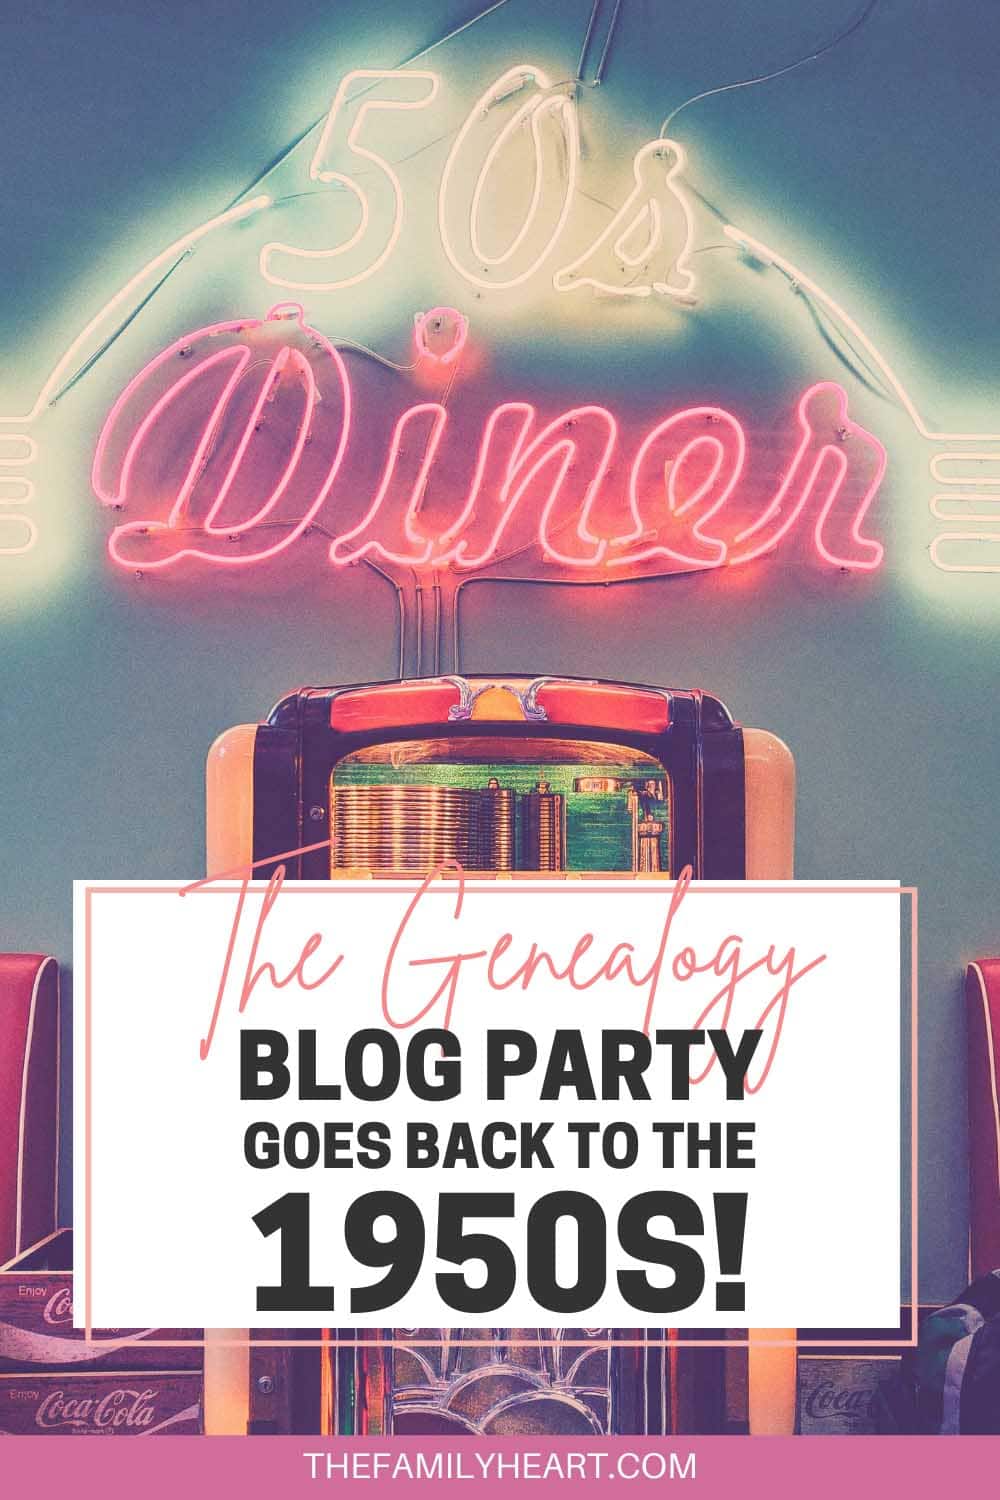 The Genealogy Blog Party: Back to the 1950s - Heart of the Family™